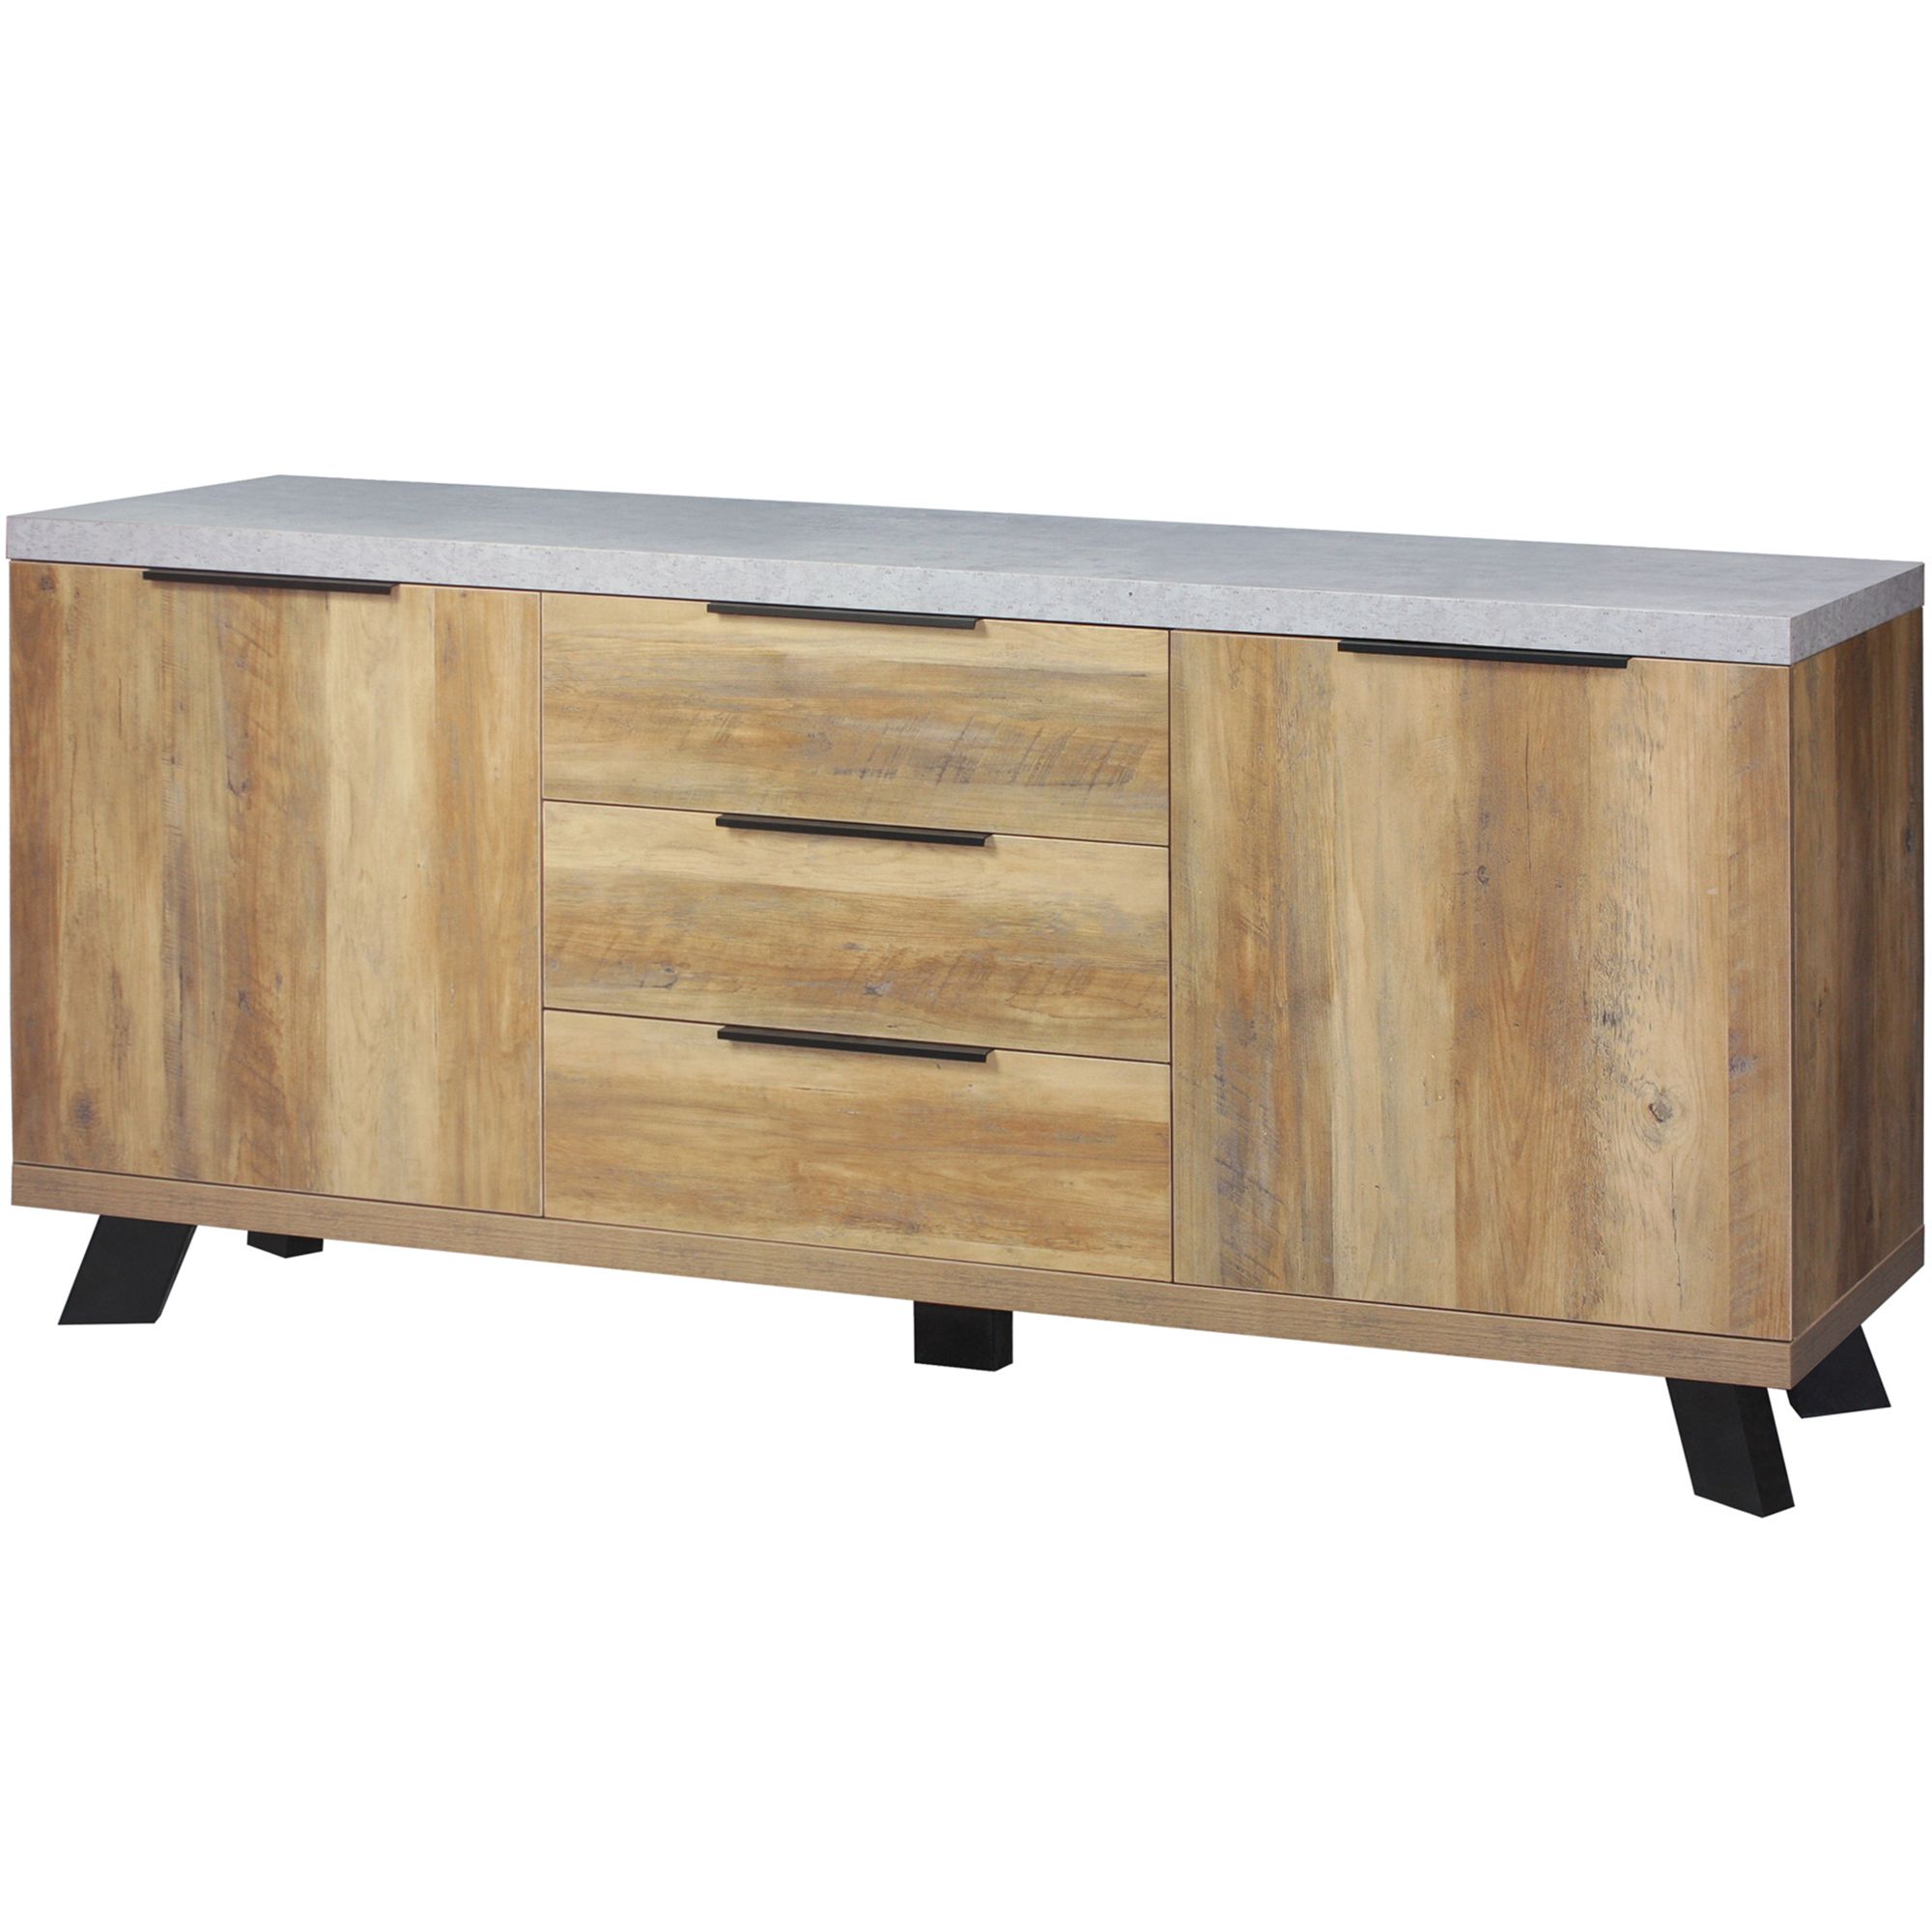 Sideboards & Buffets | Temple & Webster For Medium Buffets With Wood Top (View 13 of 20)